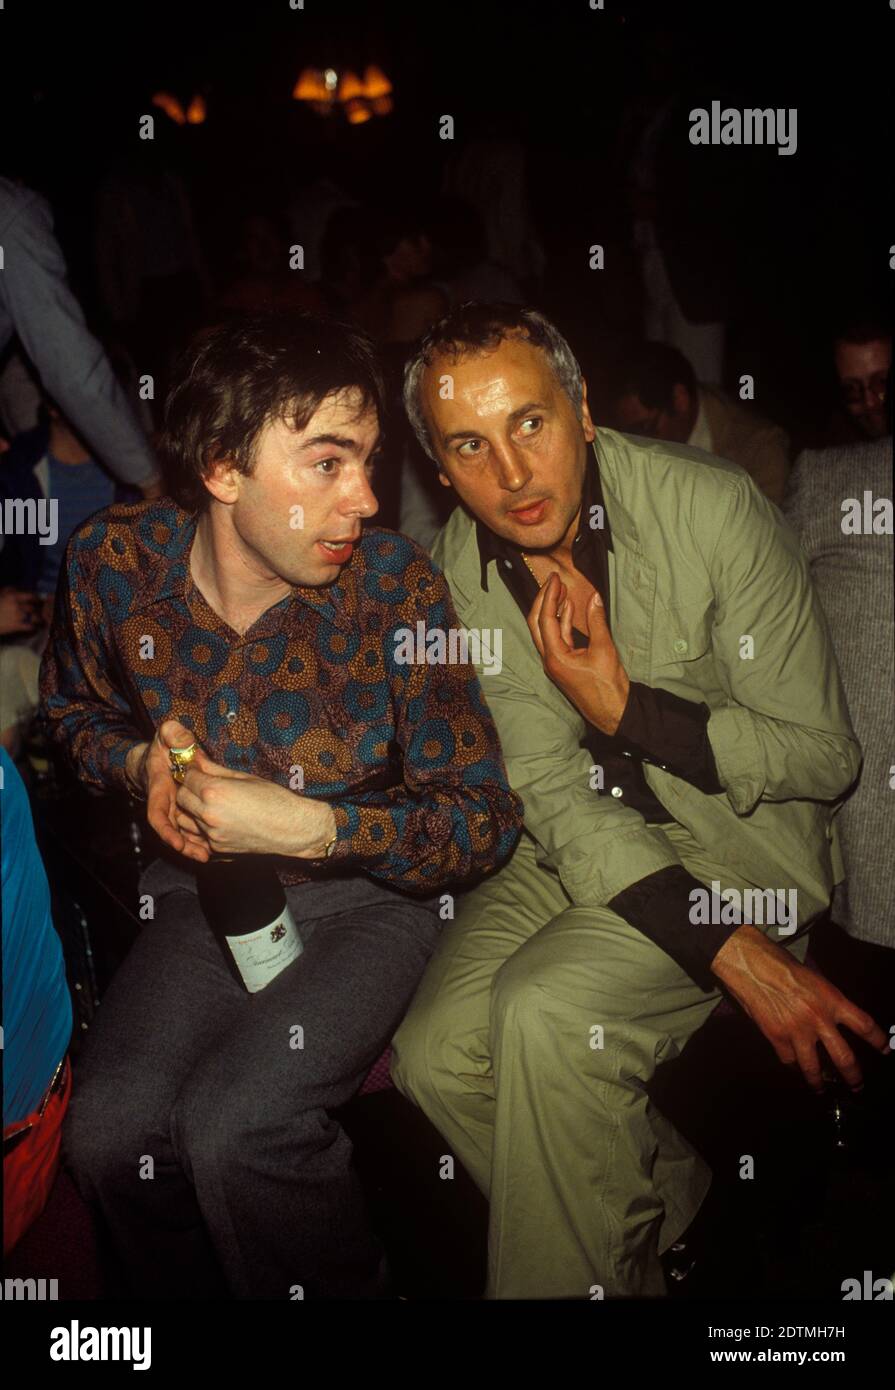 Andrew Lloyd Webber and Brian Brolly. 1980 Cannes Film Festival France.   1980s HOMER SYKES Stock Photo